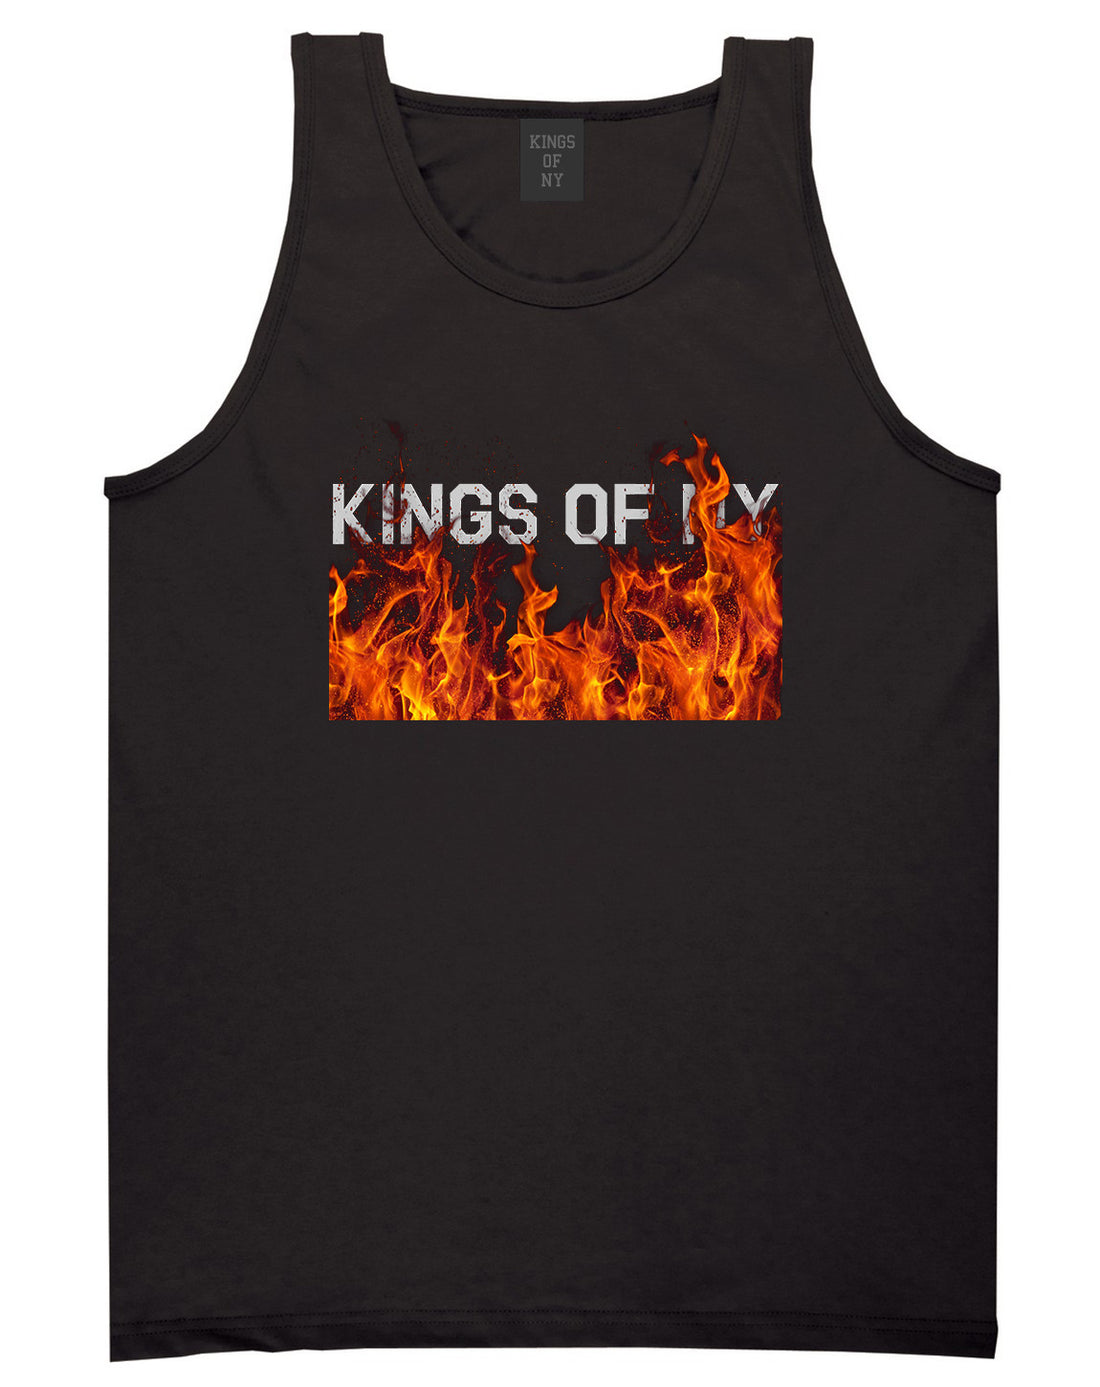 Rising From The Flames Tank Top in Black